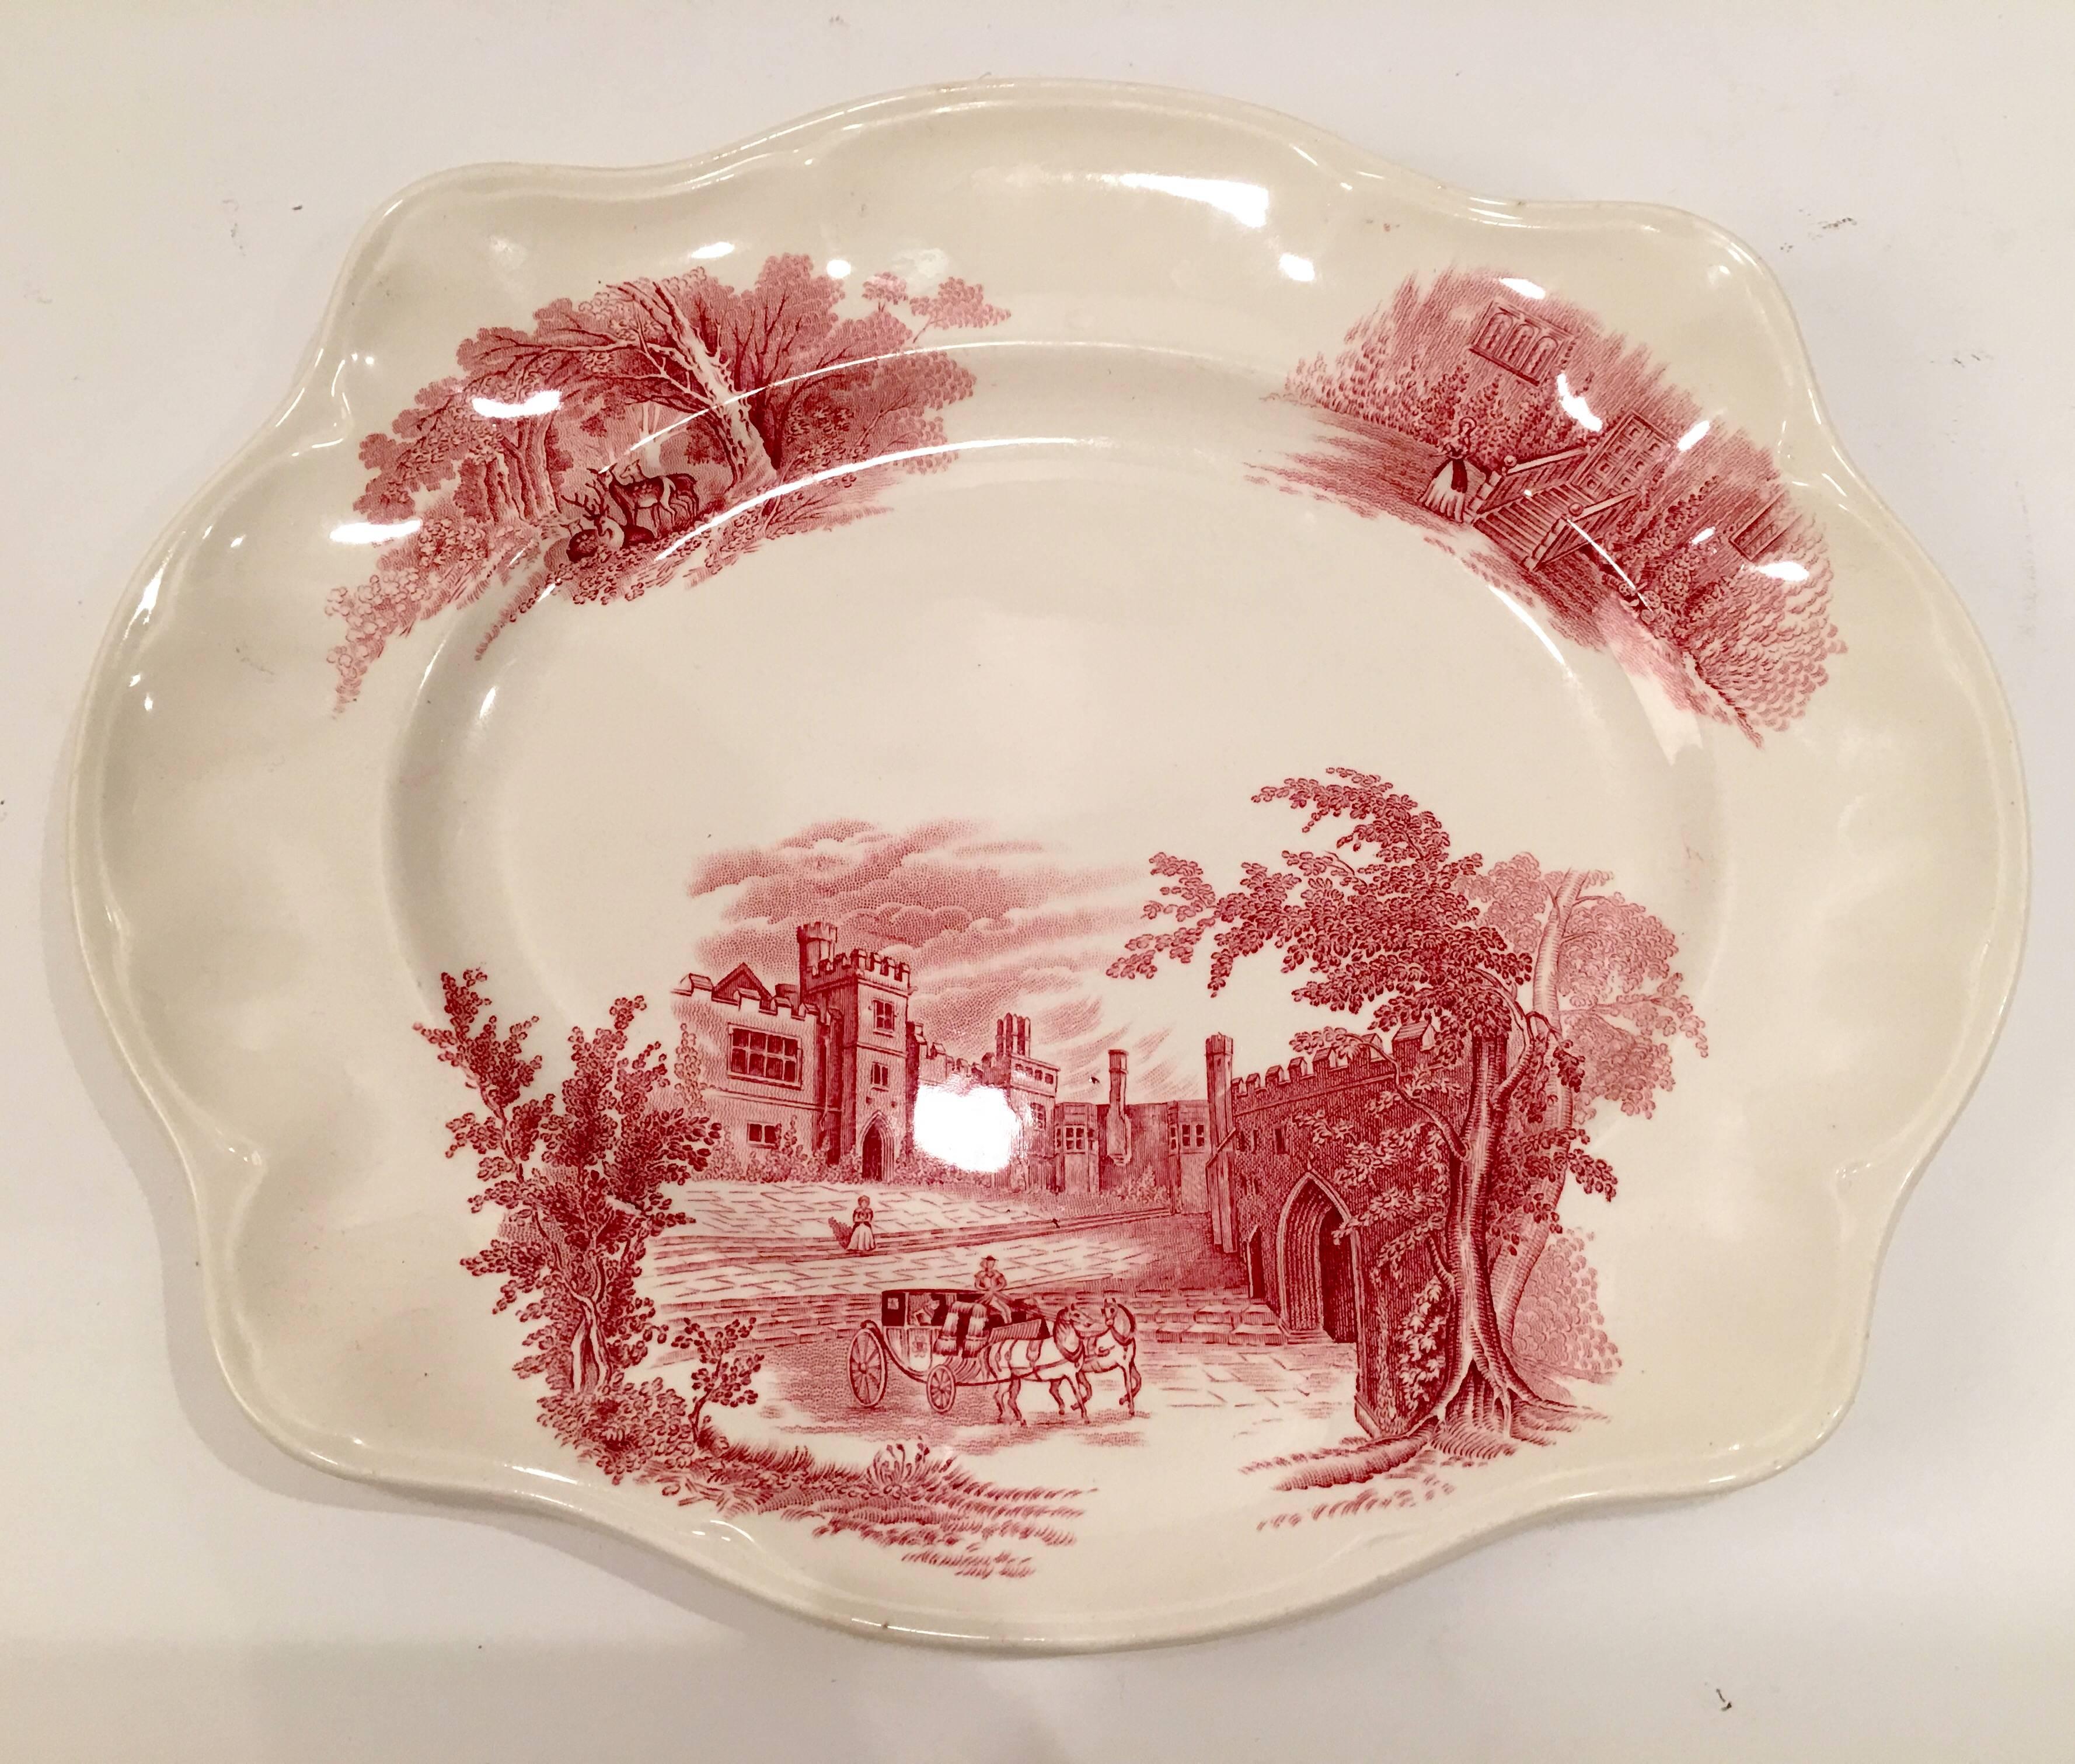 Rare English ceramic dinnerware collection of seventeen pieces "Haddon Hall" Pink. "Haddon Hall" is renowned as the scene of elopement of Dorothy Vernon in 16th Century".The pattern depicts a horse drawn carriage in front of